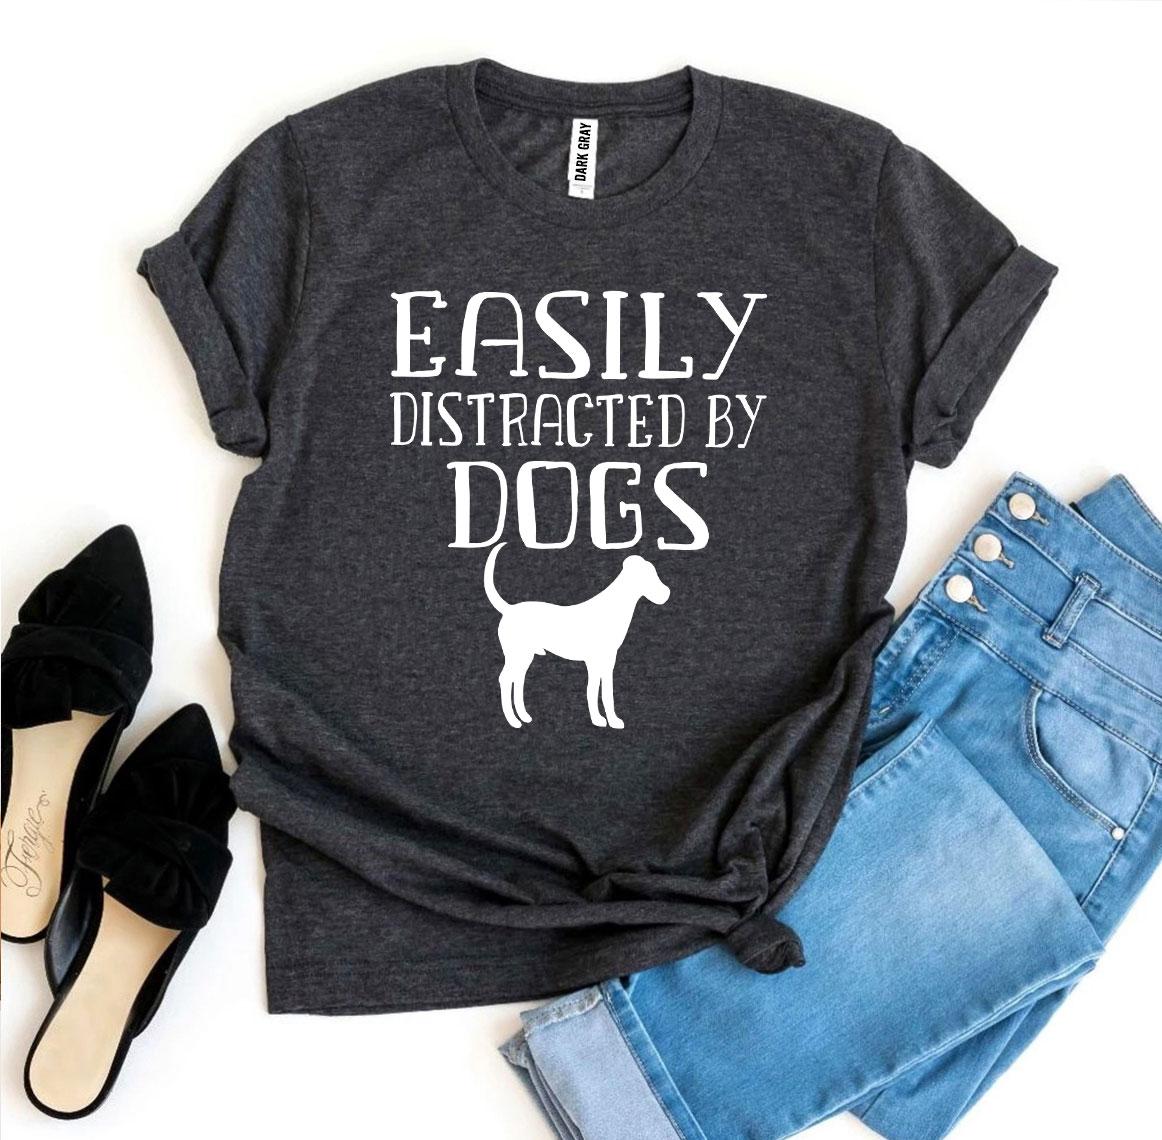 Easily Distracted By Dogs T-shirtProduct description:
Make a statement with this Easily Distracted By Dogs T-shirt! It's made of premium quality ring spun cotton for a soft feel and comfortable fit.T-shirtsEXPRESS WOMEN'S FASHIONAgateEasily Distracted